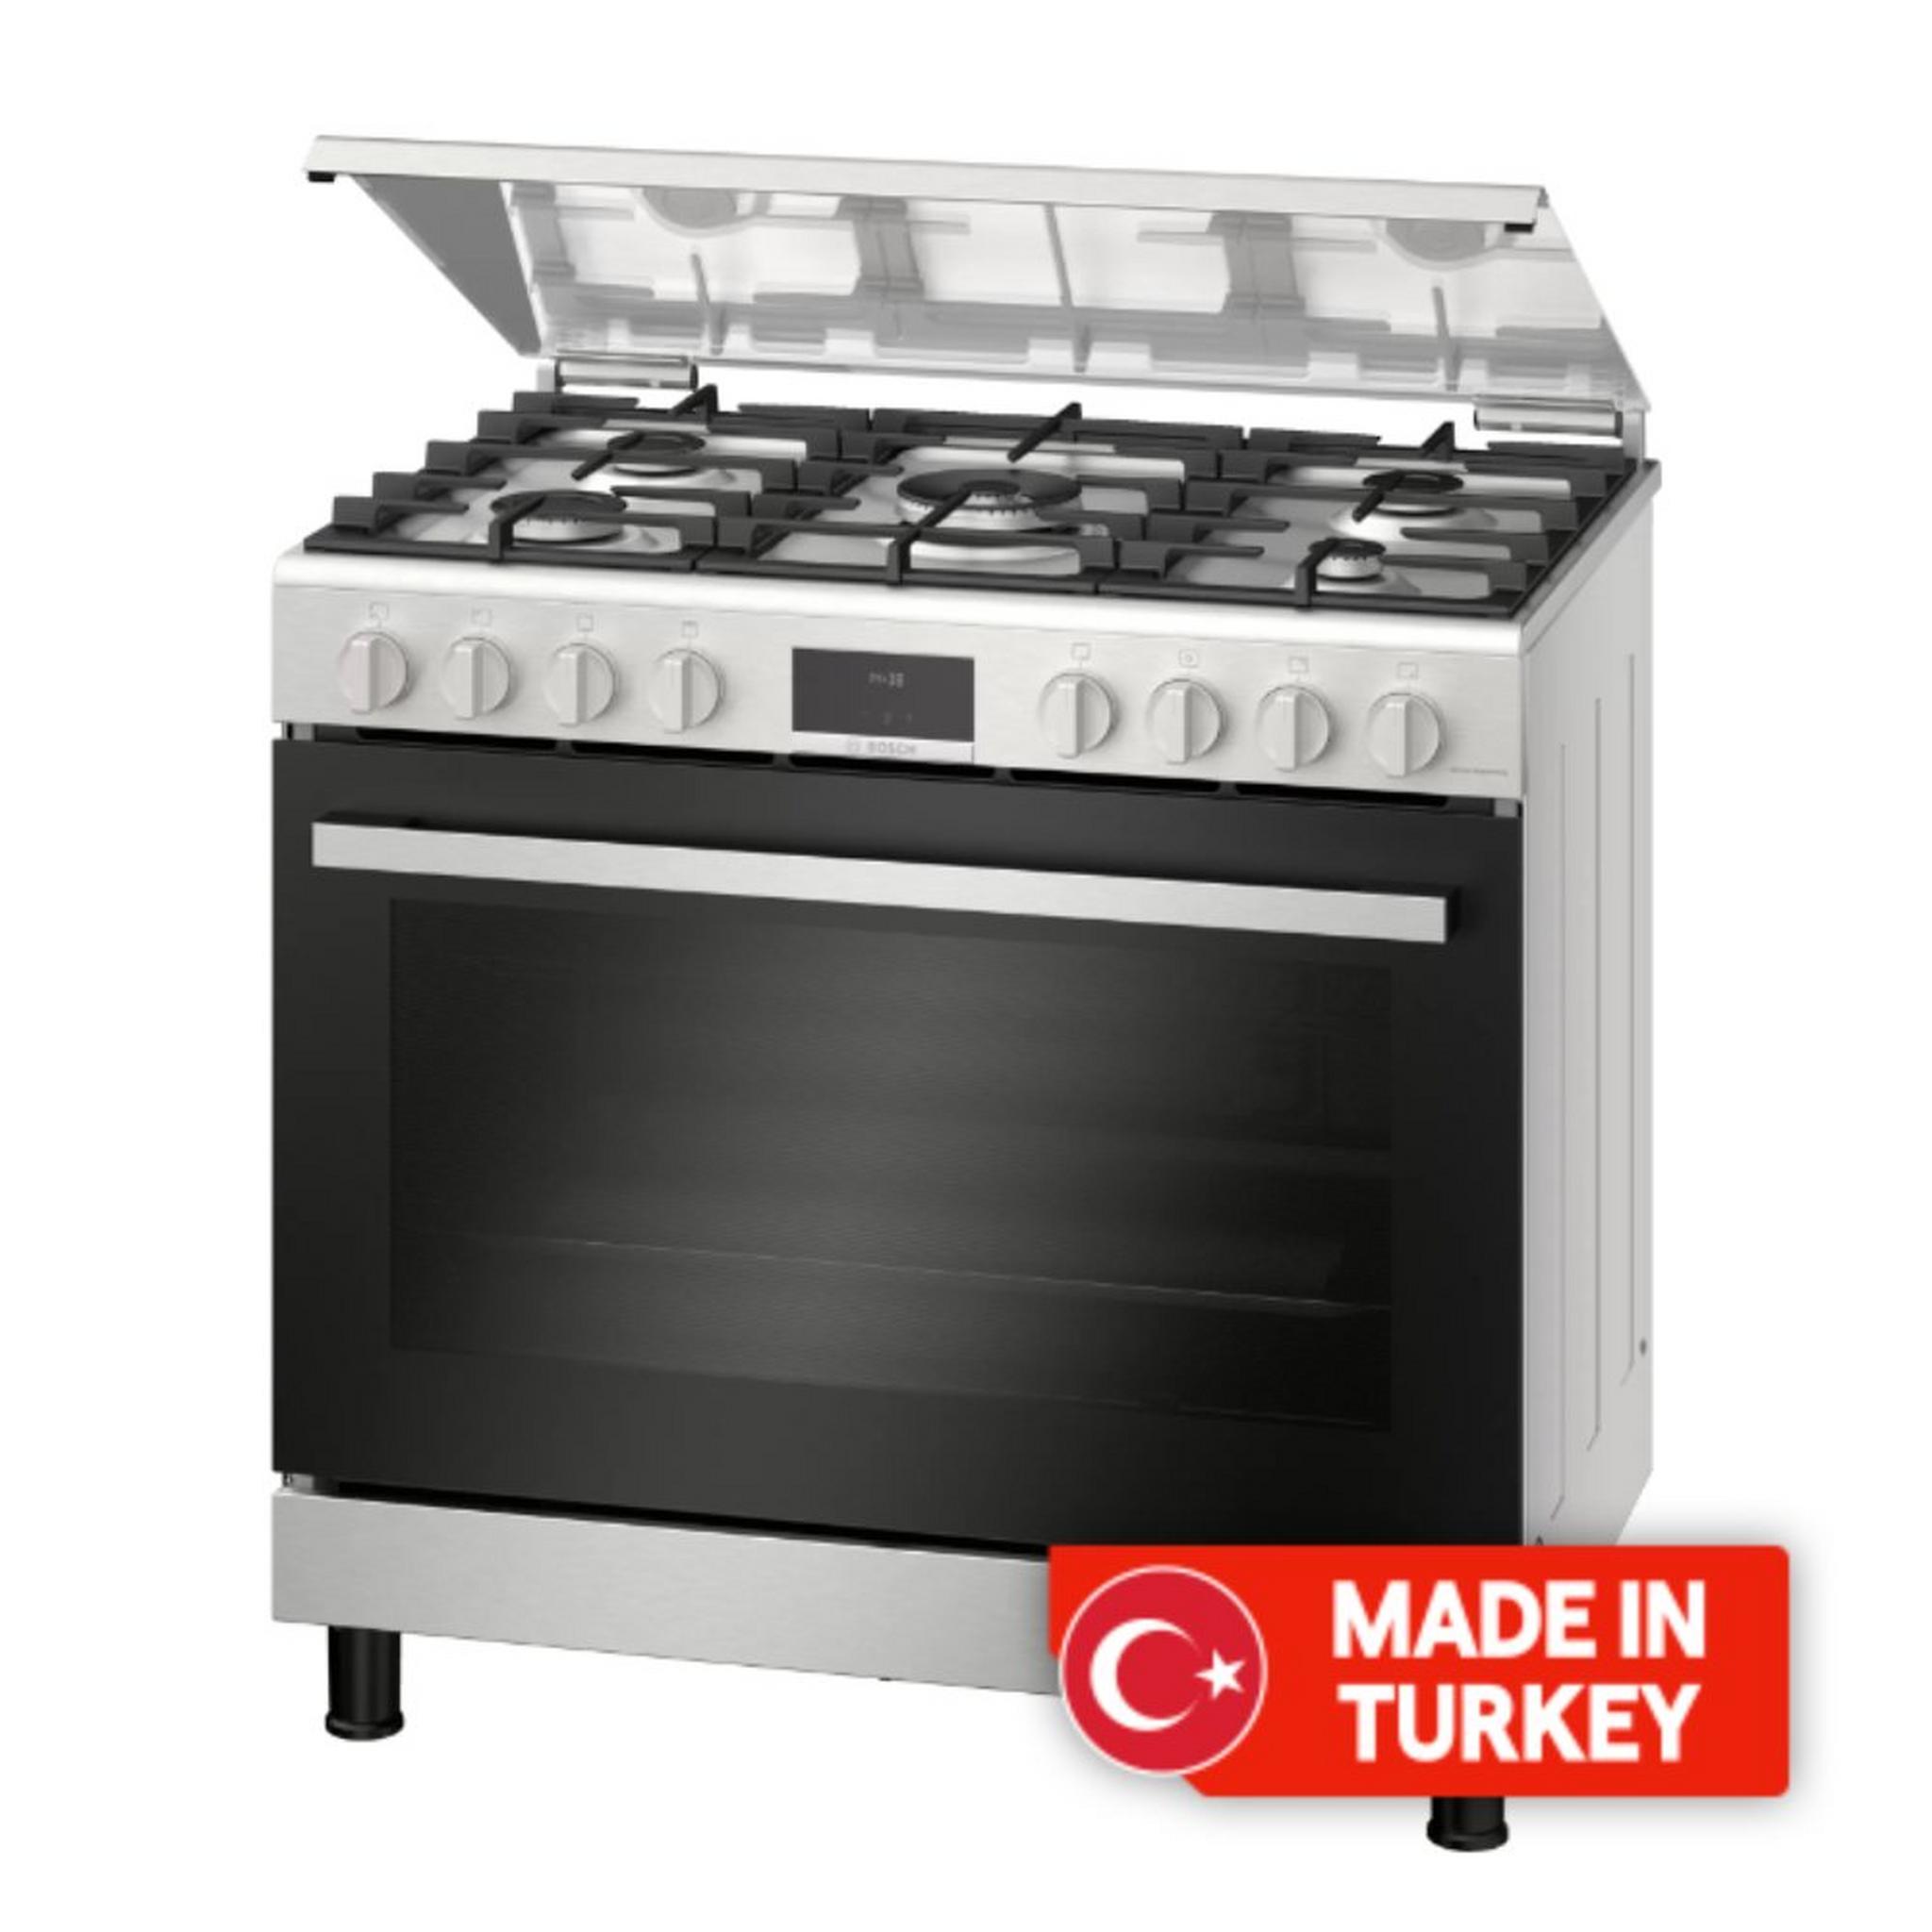 Bosch 5 Burners Gas Cooker, 90X60 CM, HGX5H0W50M - Stainless Steel